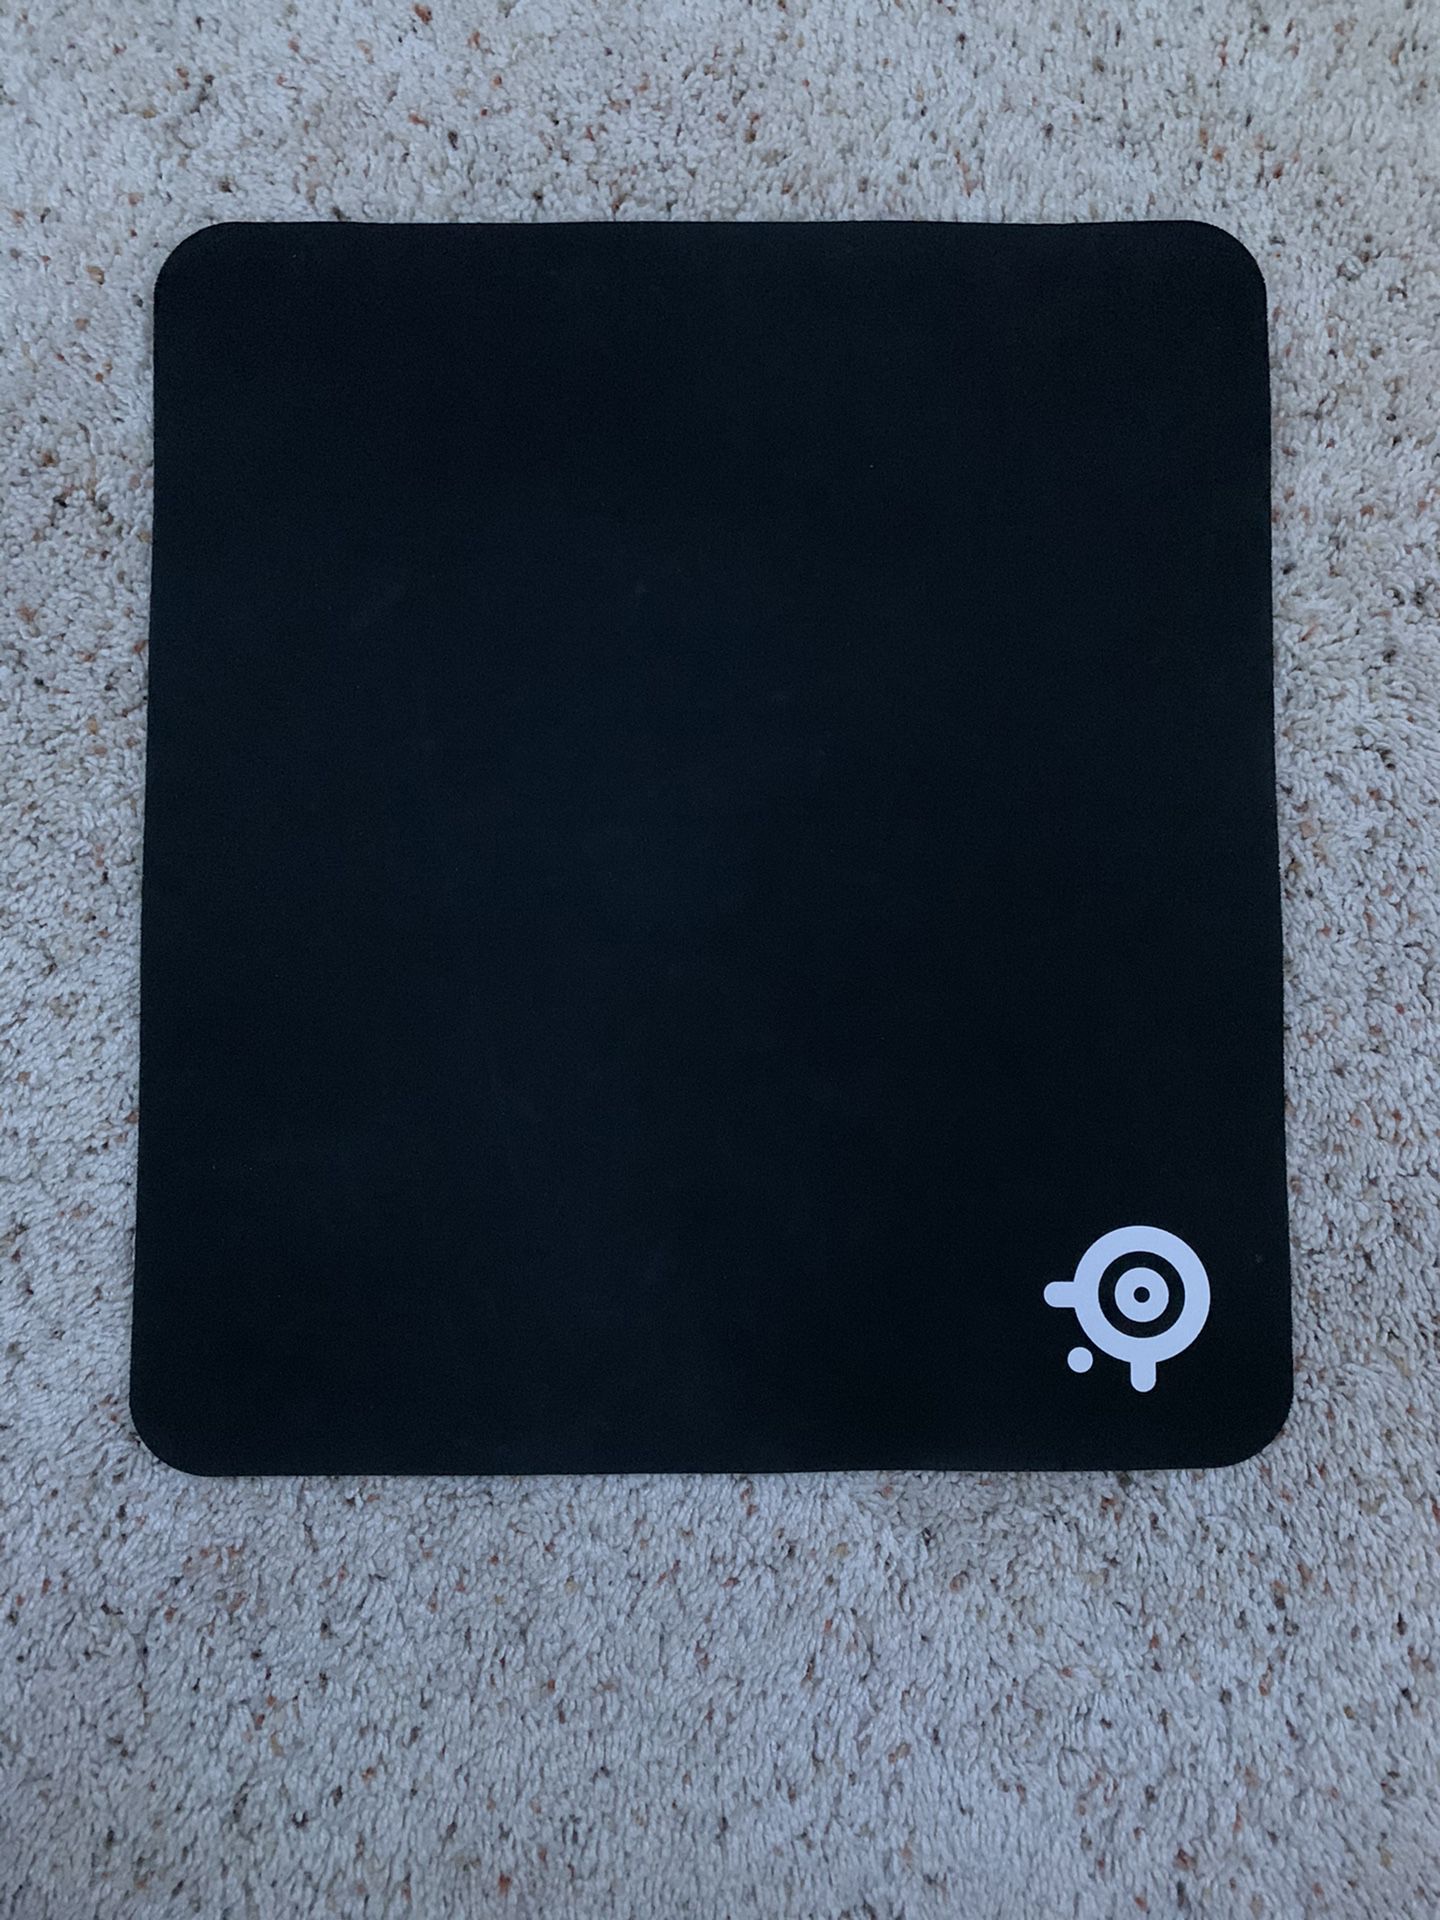 Steelseries Qck Large Mouse Pad